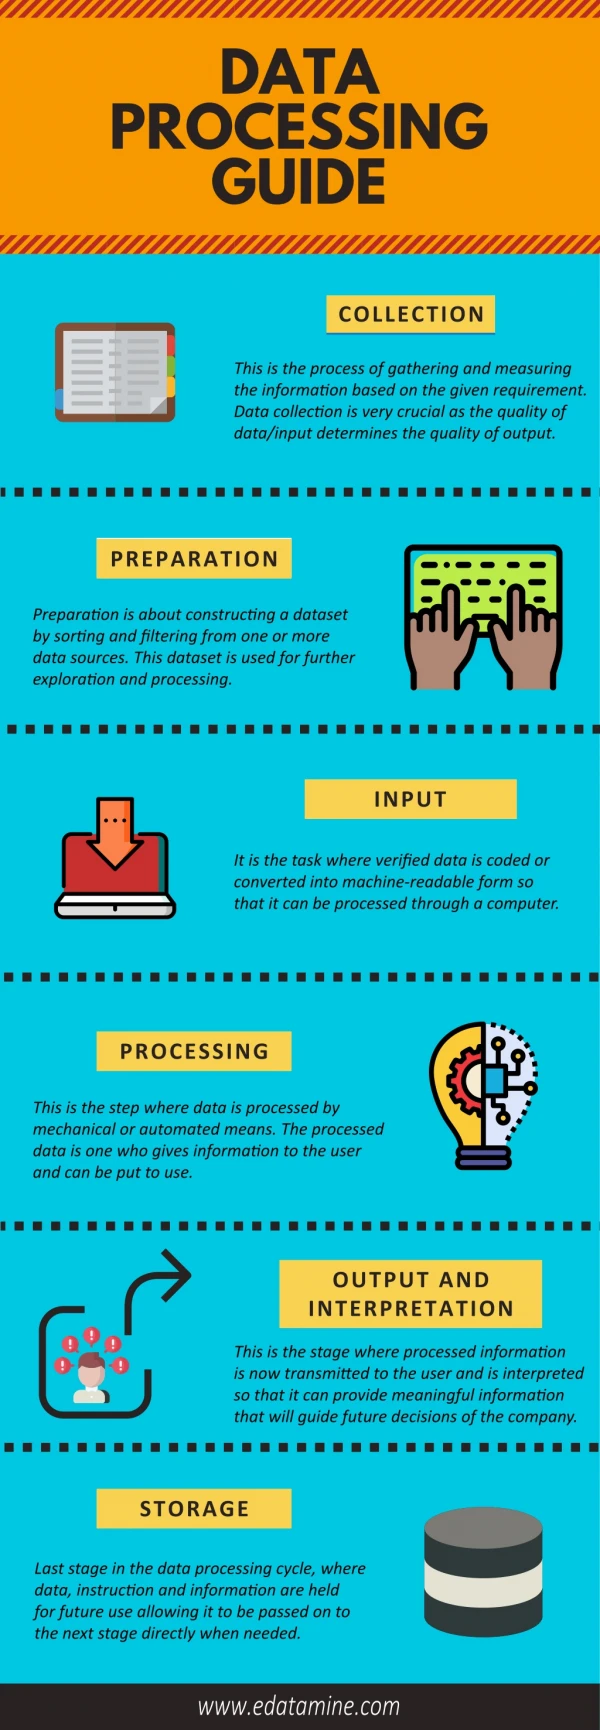 6 Stages of Data Processing - Data Processing Services Guide